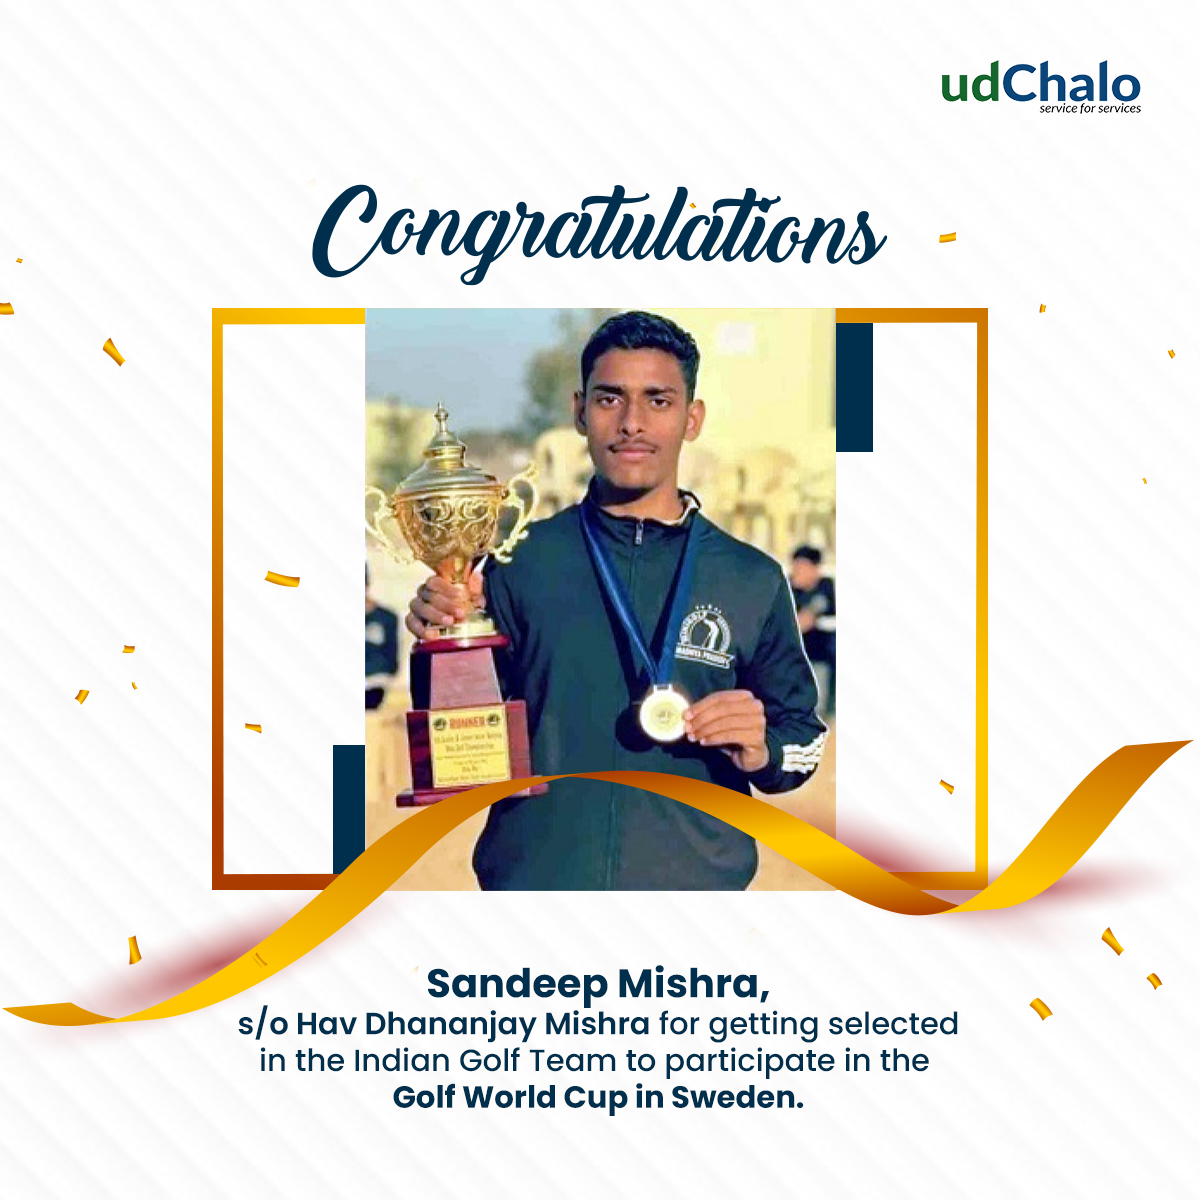 Our sincere congratulations to the champ on being selected for the #IndianGolfteam to compete in the #GolfWorldCup in Sweden. We wish you good luck in your future endeavors!

#udChalo #Sweden #maharregiment #indianarmy #GrowGolf #GoGolf #worldcup #WorldCupofGolf #sandeepmishra